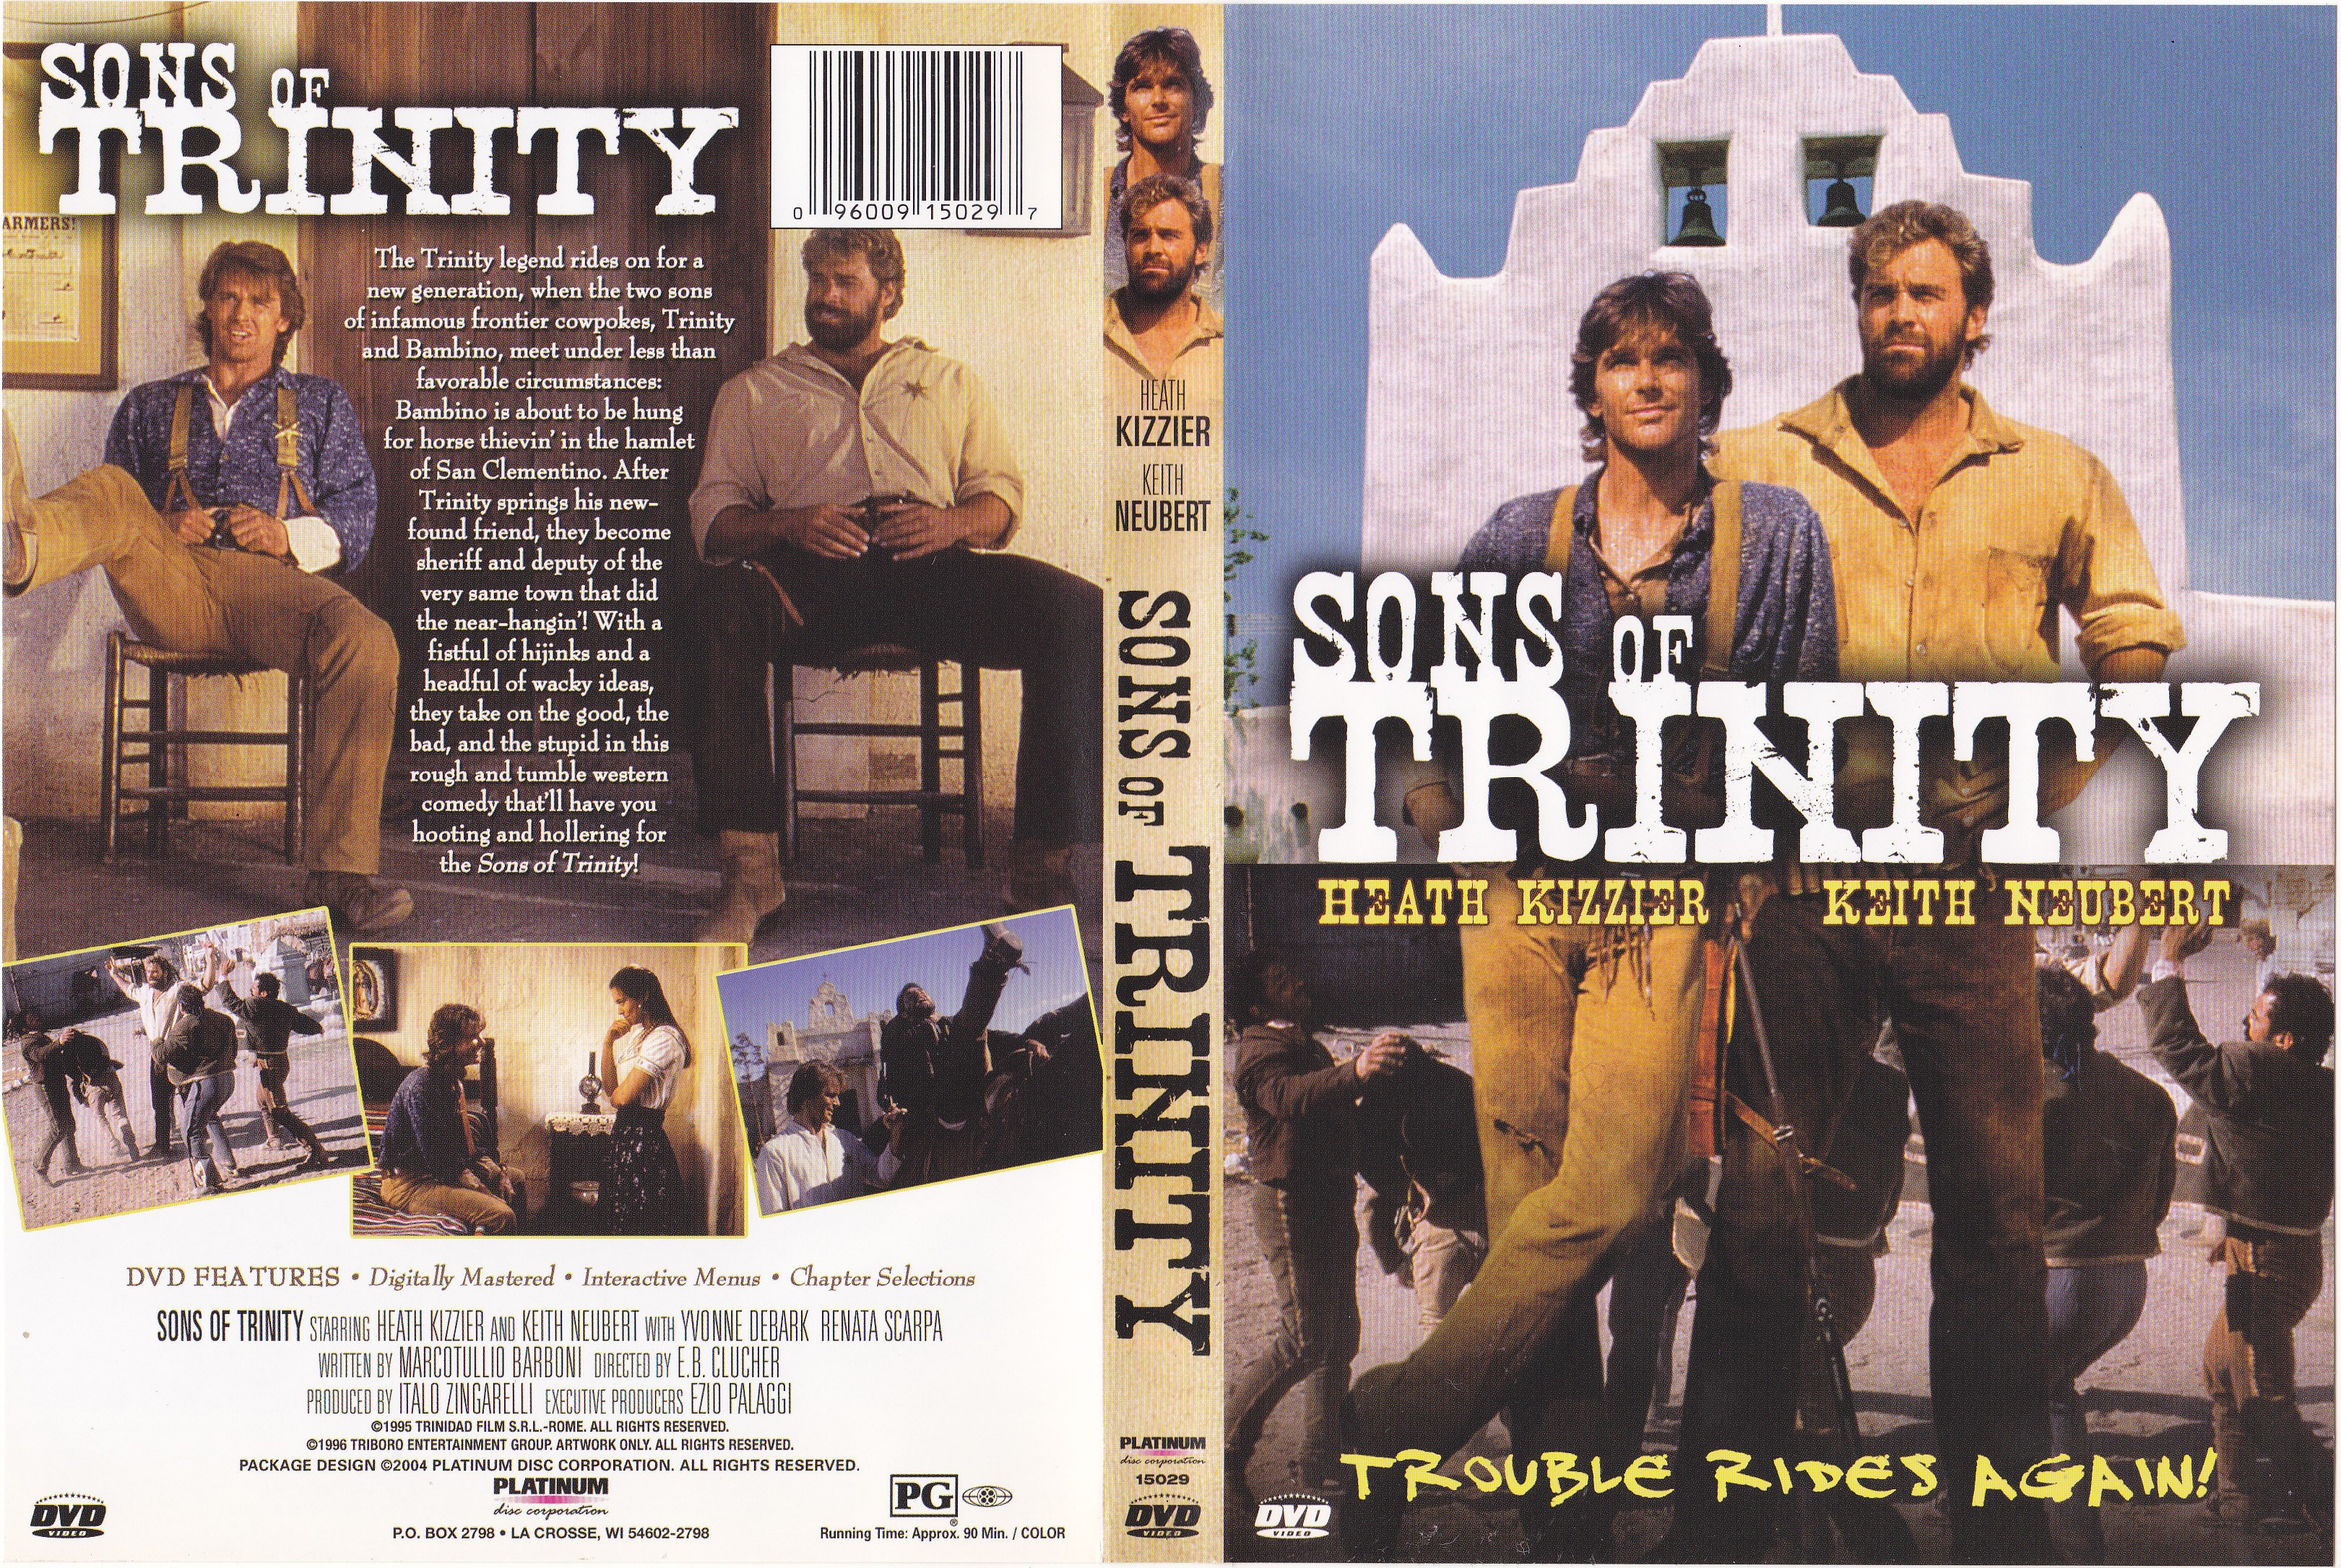 Jaquette DVD Sons of Trinity Zone 1